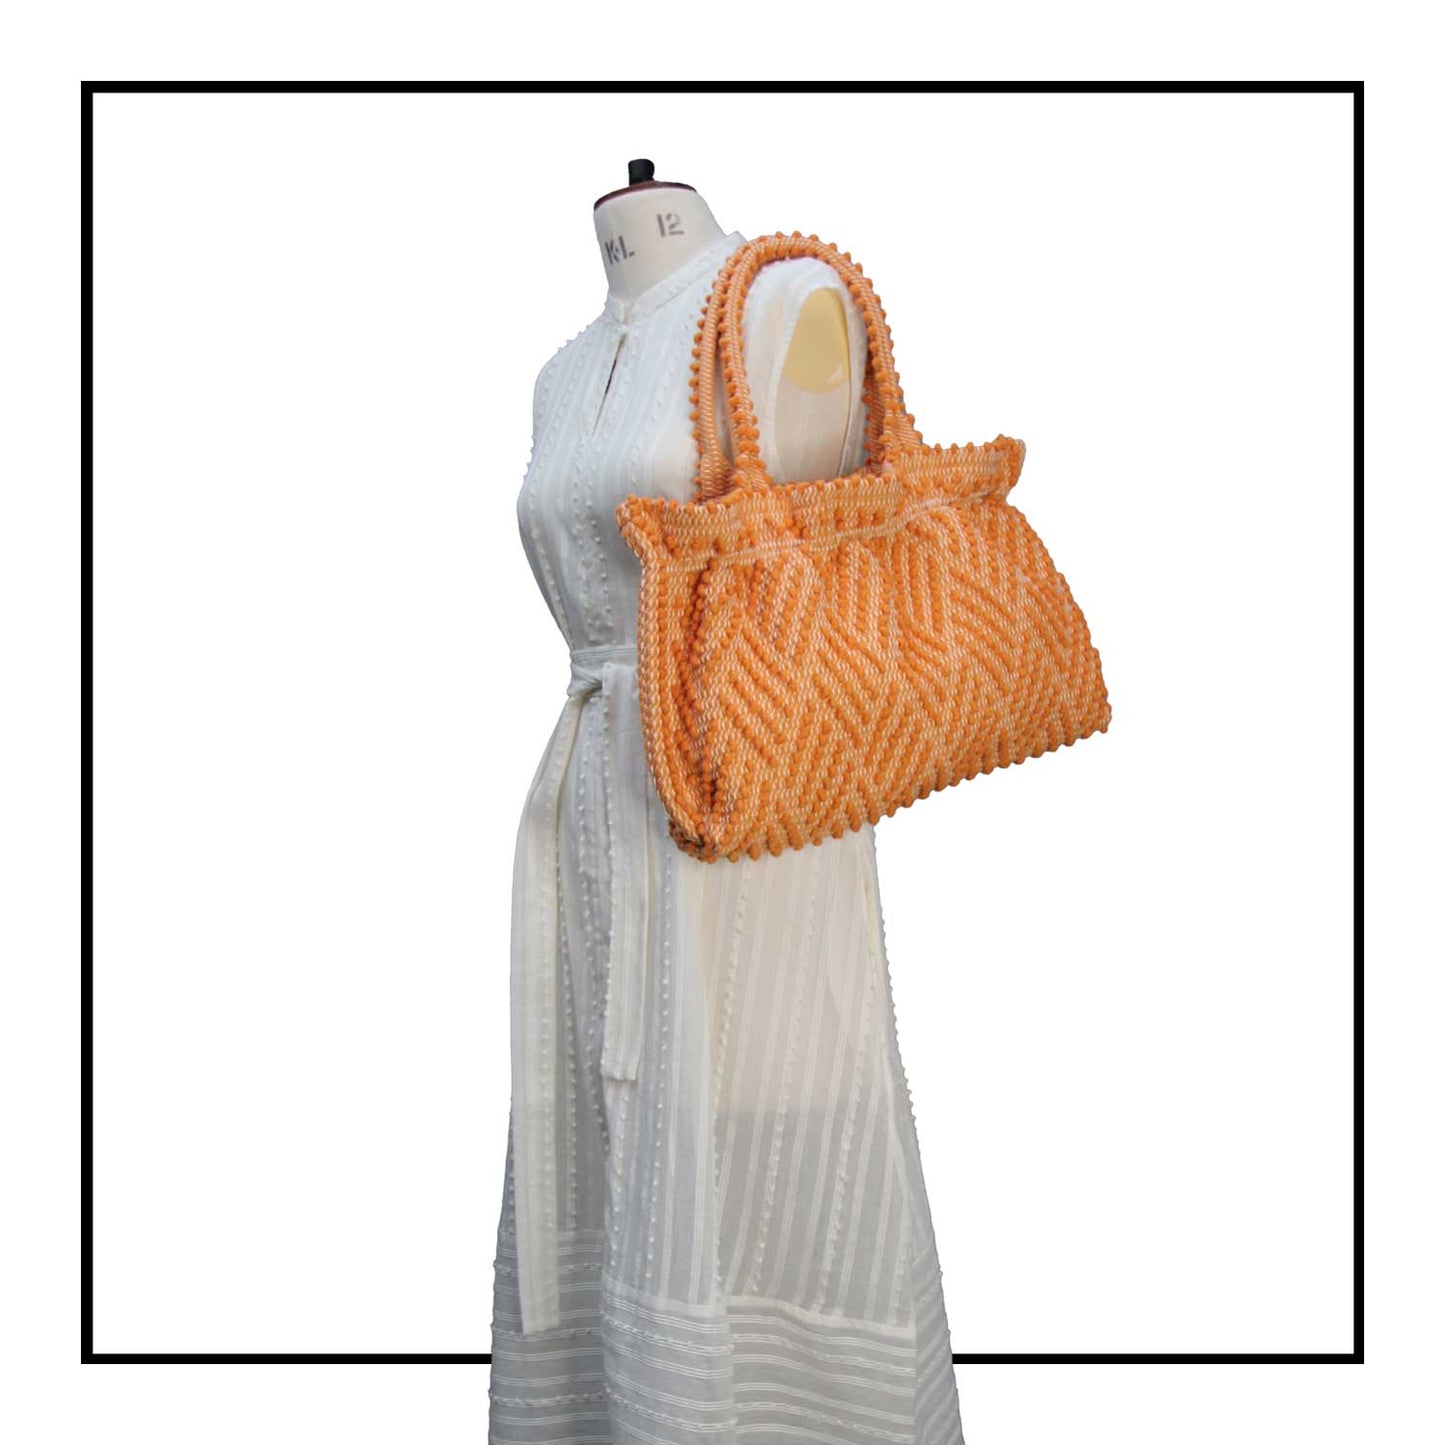 The handbag on a model - Sustainable tote - summer bag - luxury handbag - handwoven black and white tote made in Italy by hand • timeless individualistic fashion • eco-friendly fashion • socially responsible, lasting fashion